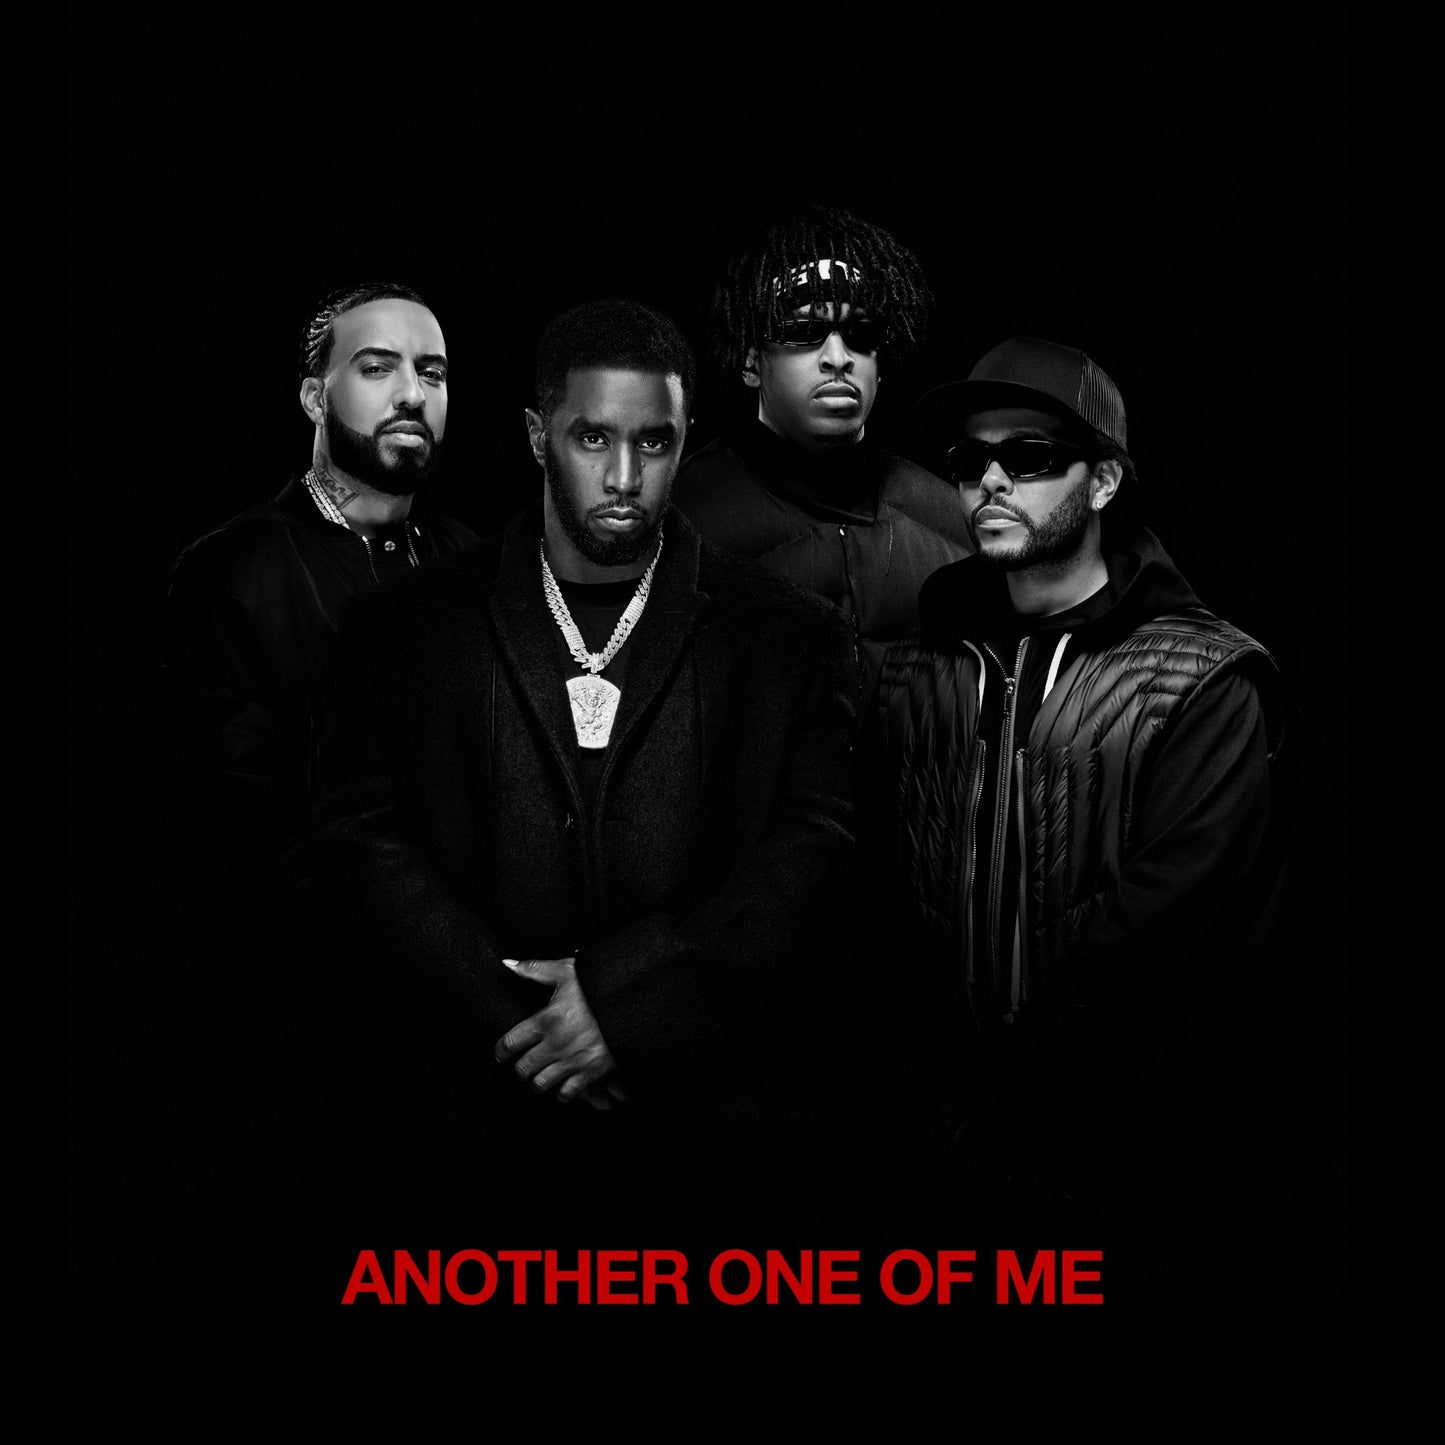 Diddy - Another One of Me ft. The Weeknd, 21 Savage, French Montana (Studio Acapella)